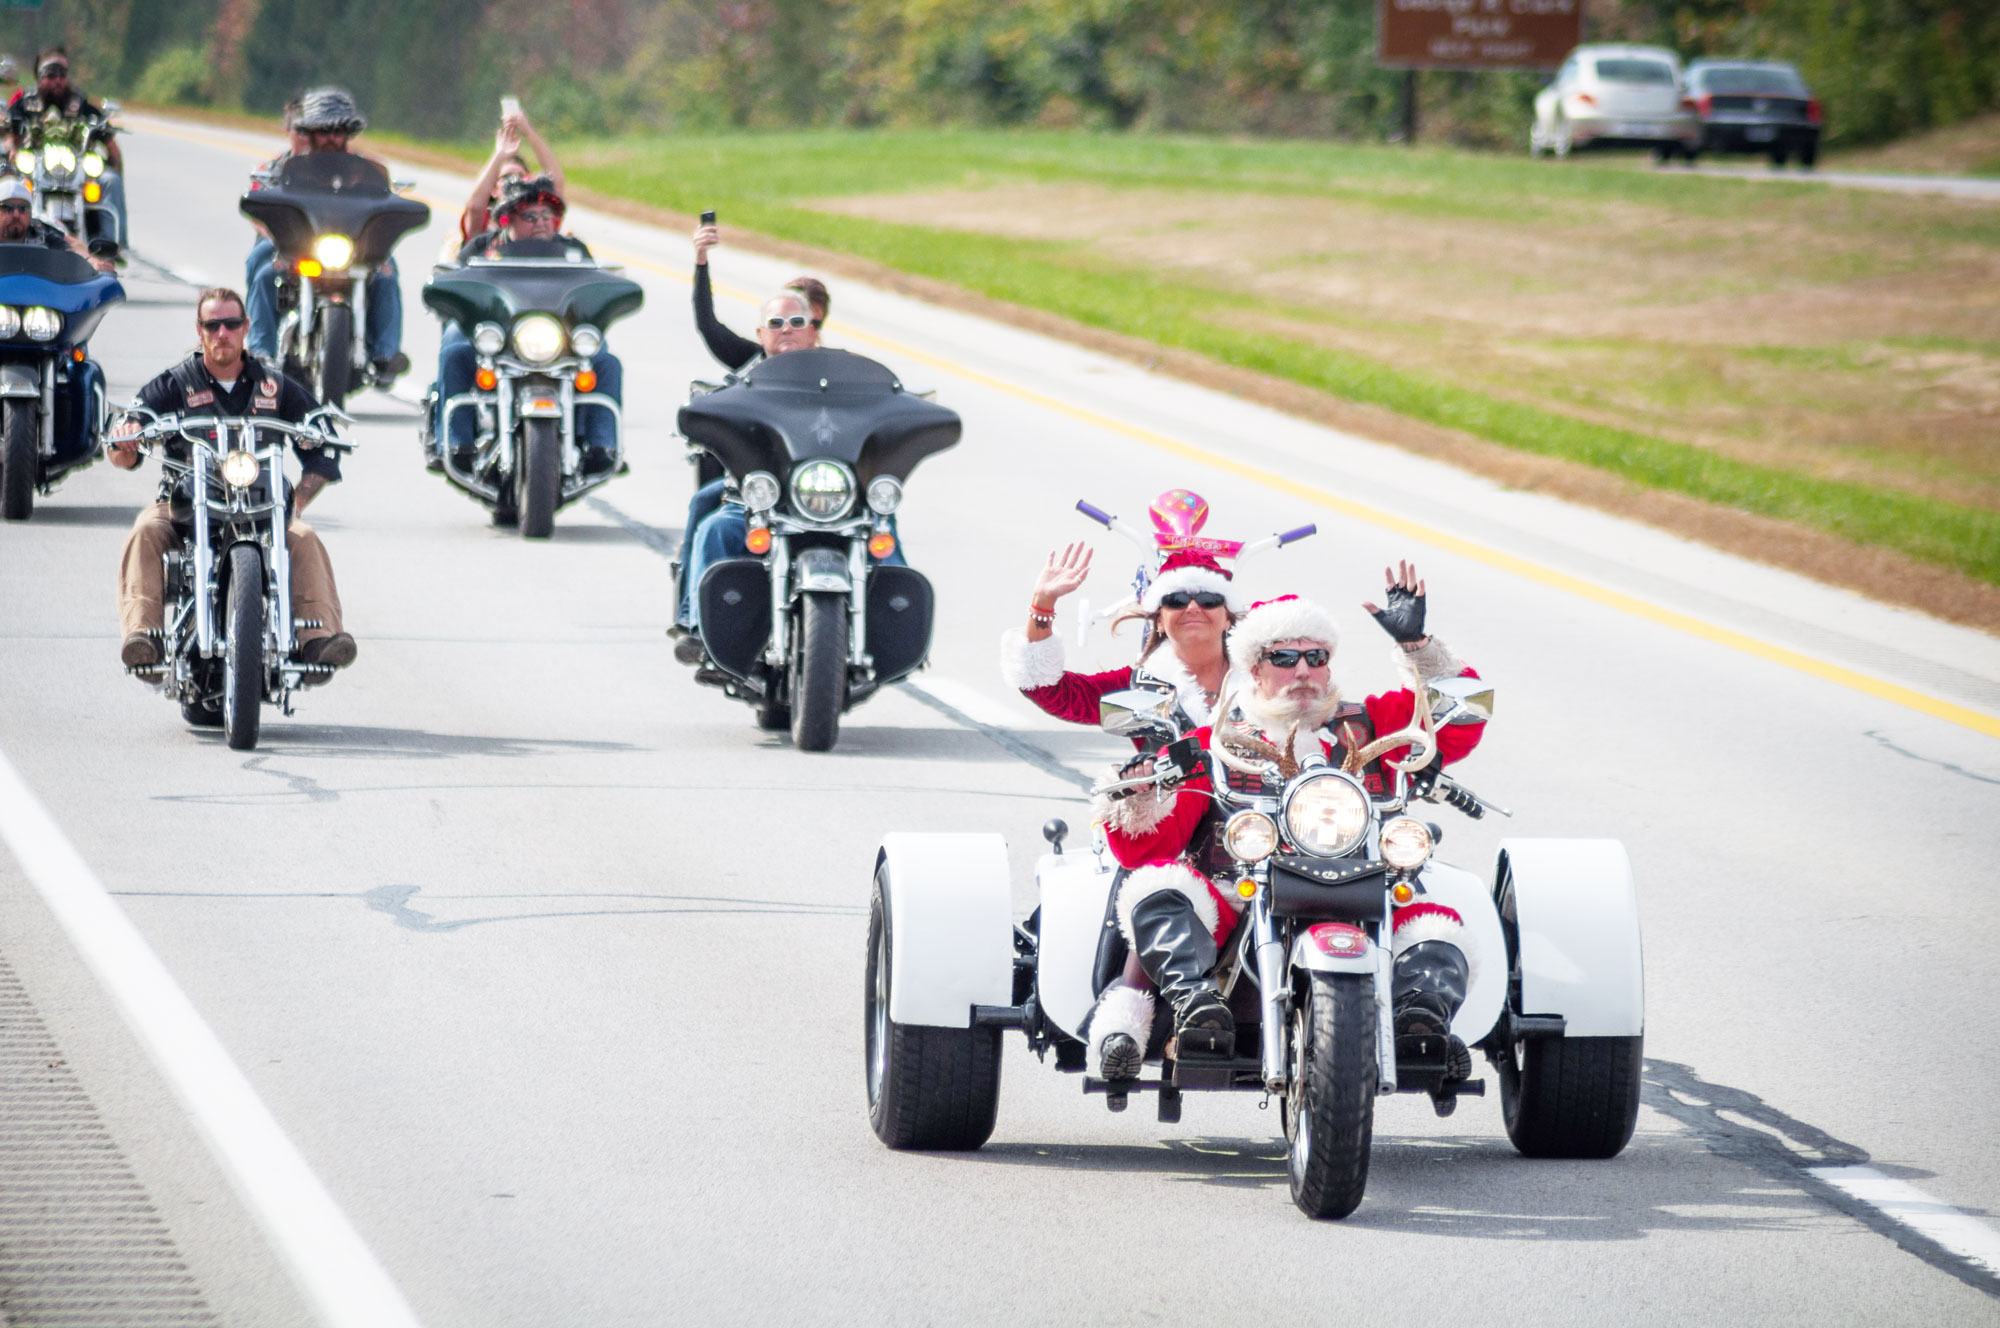 Annual Highway Hikers Toy Run is Roaring Success